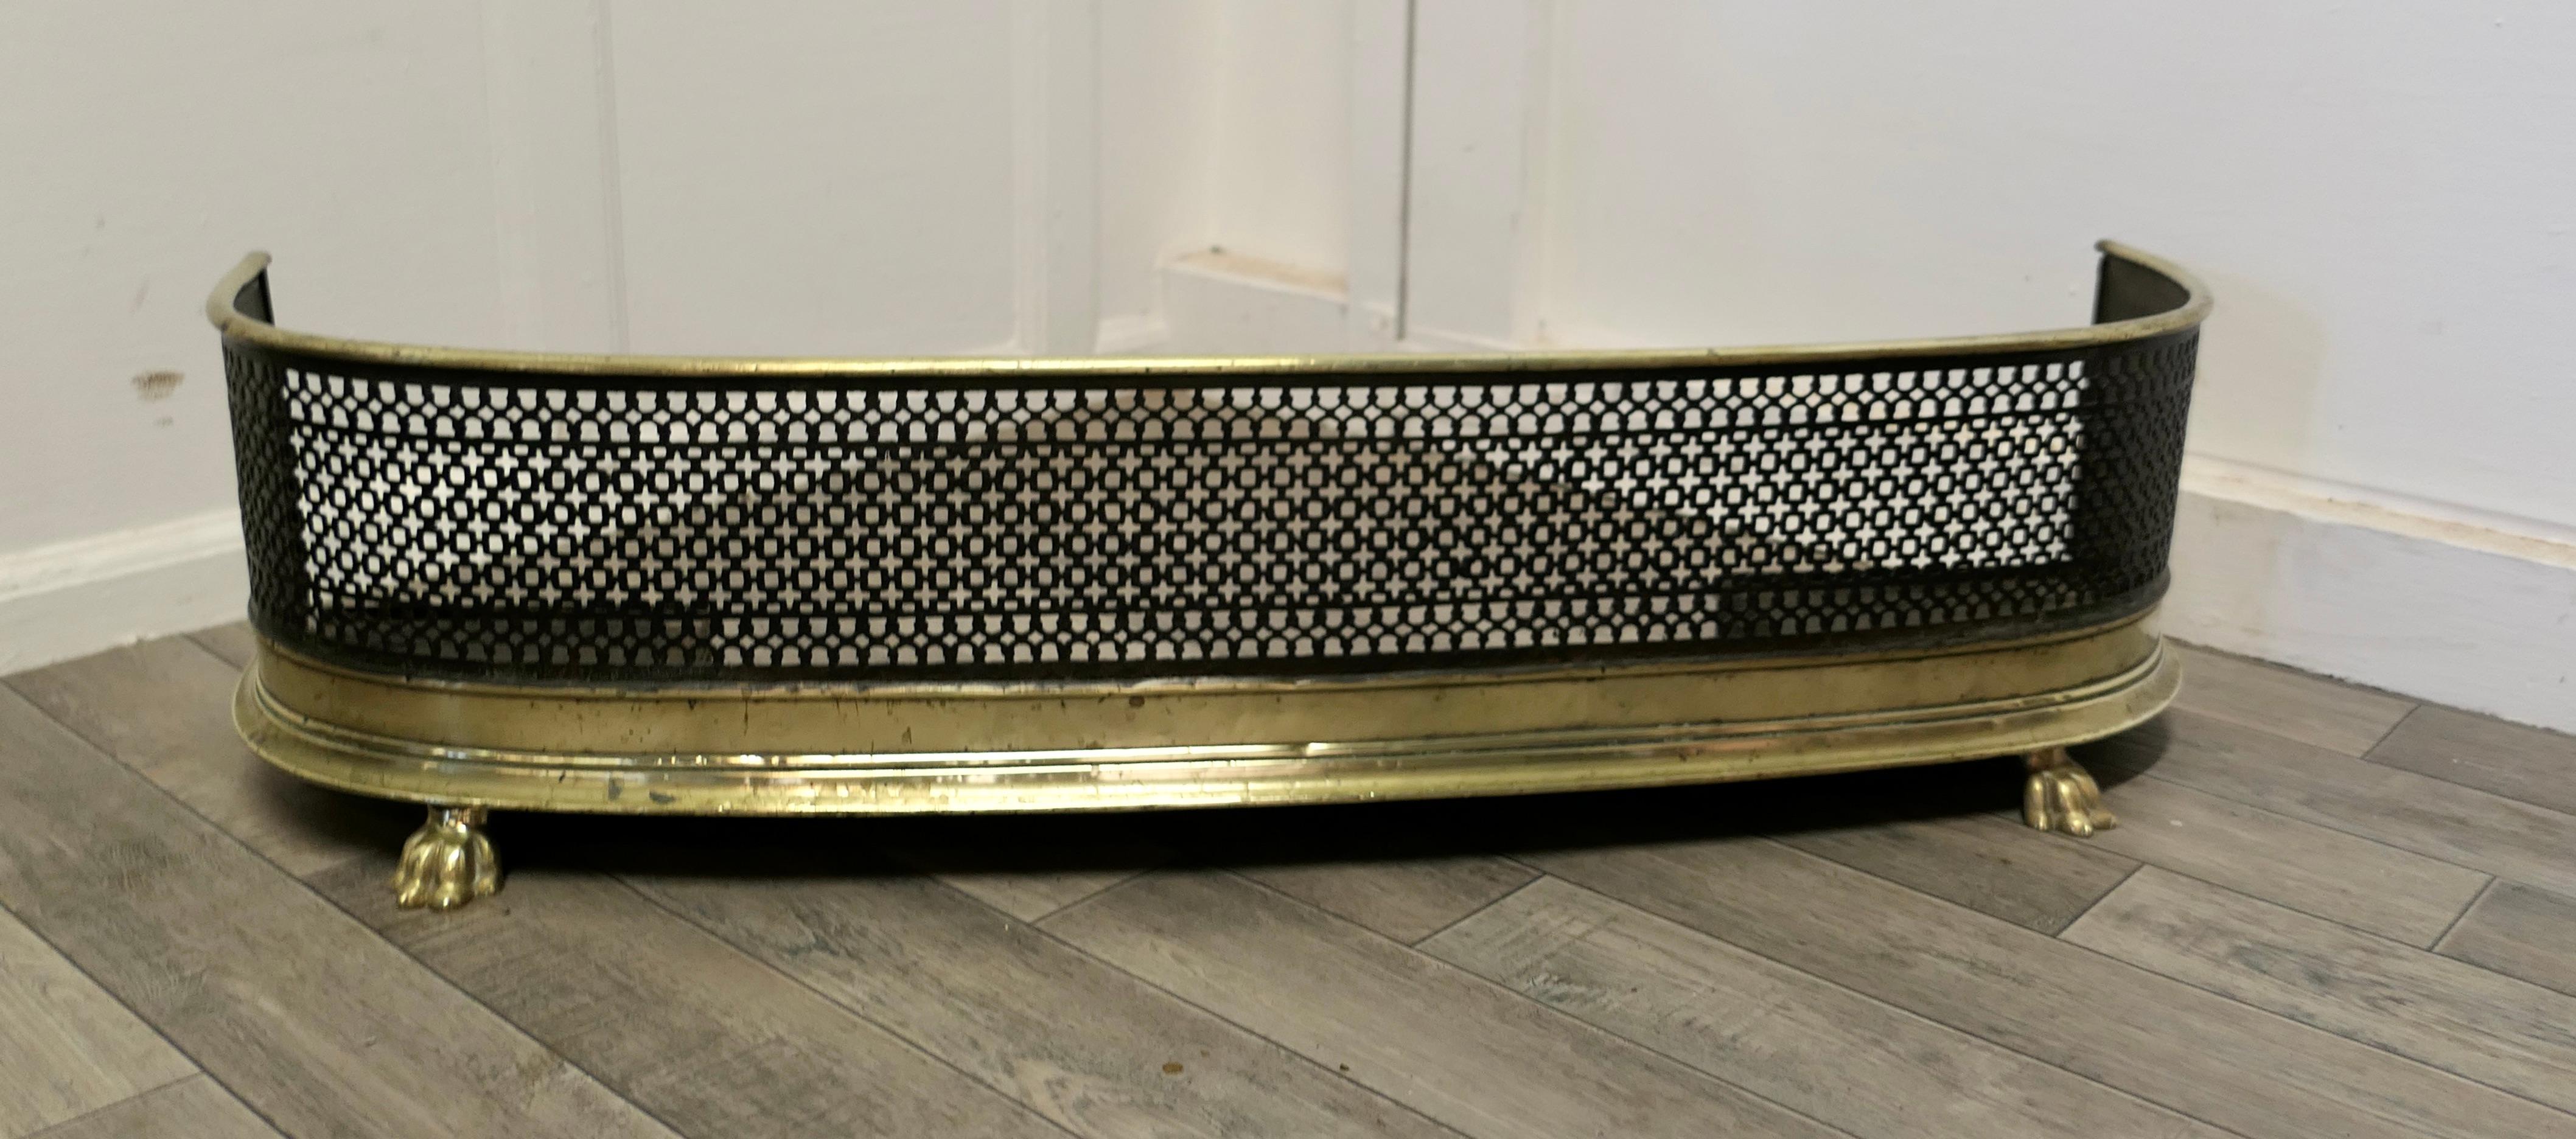 Victorian brass and iron Fireside Fender

A Beautiful slightly curved Victorian antique fender 
The fender has a slightly curved brass top rail, steel metal mesh and a deep brass base with decorative broad feet

The fender is in very good order